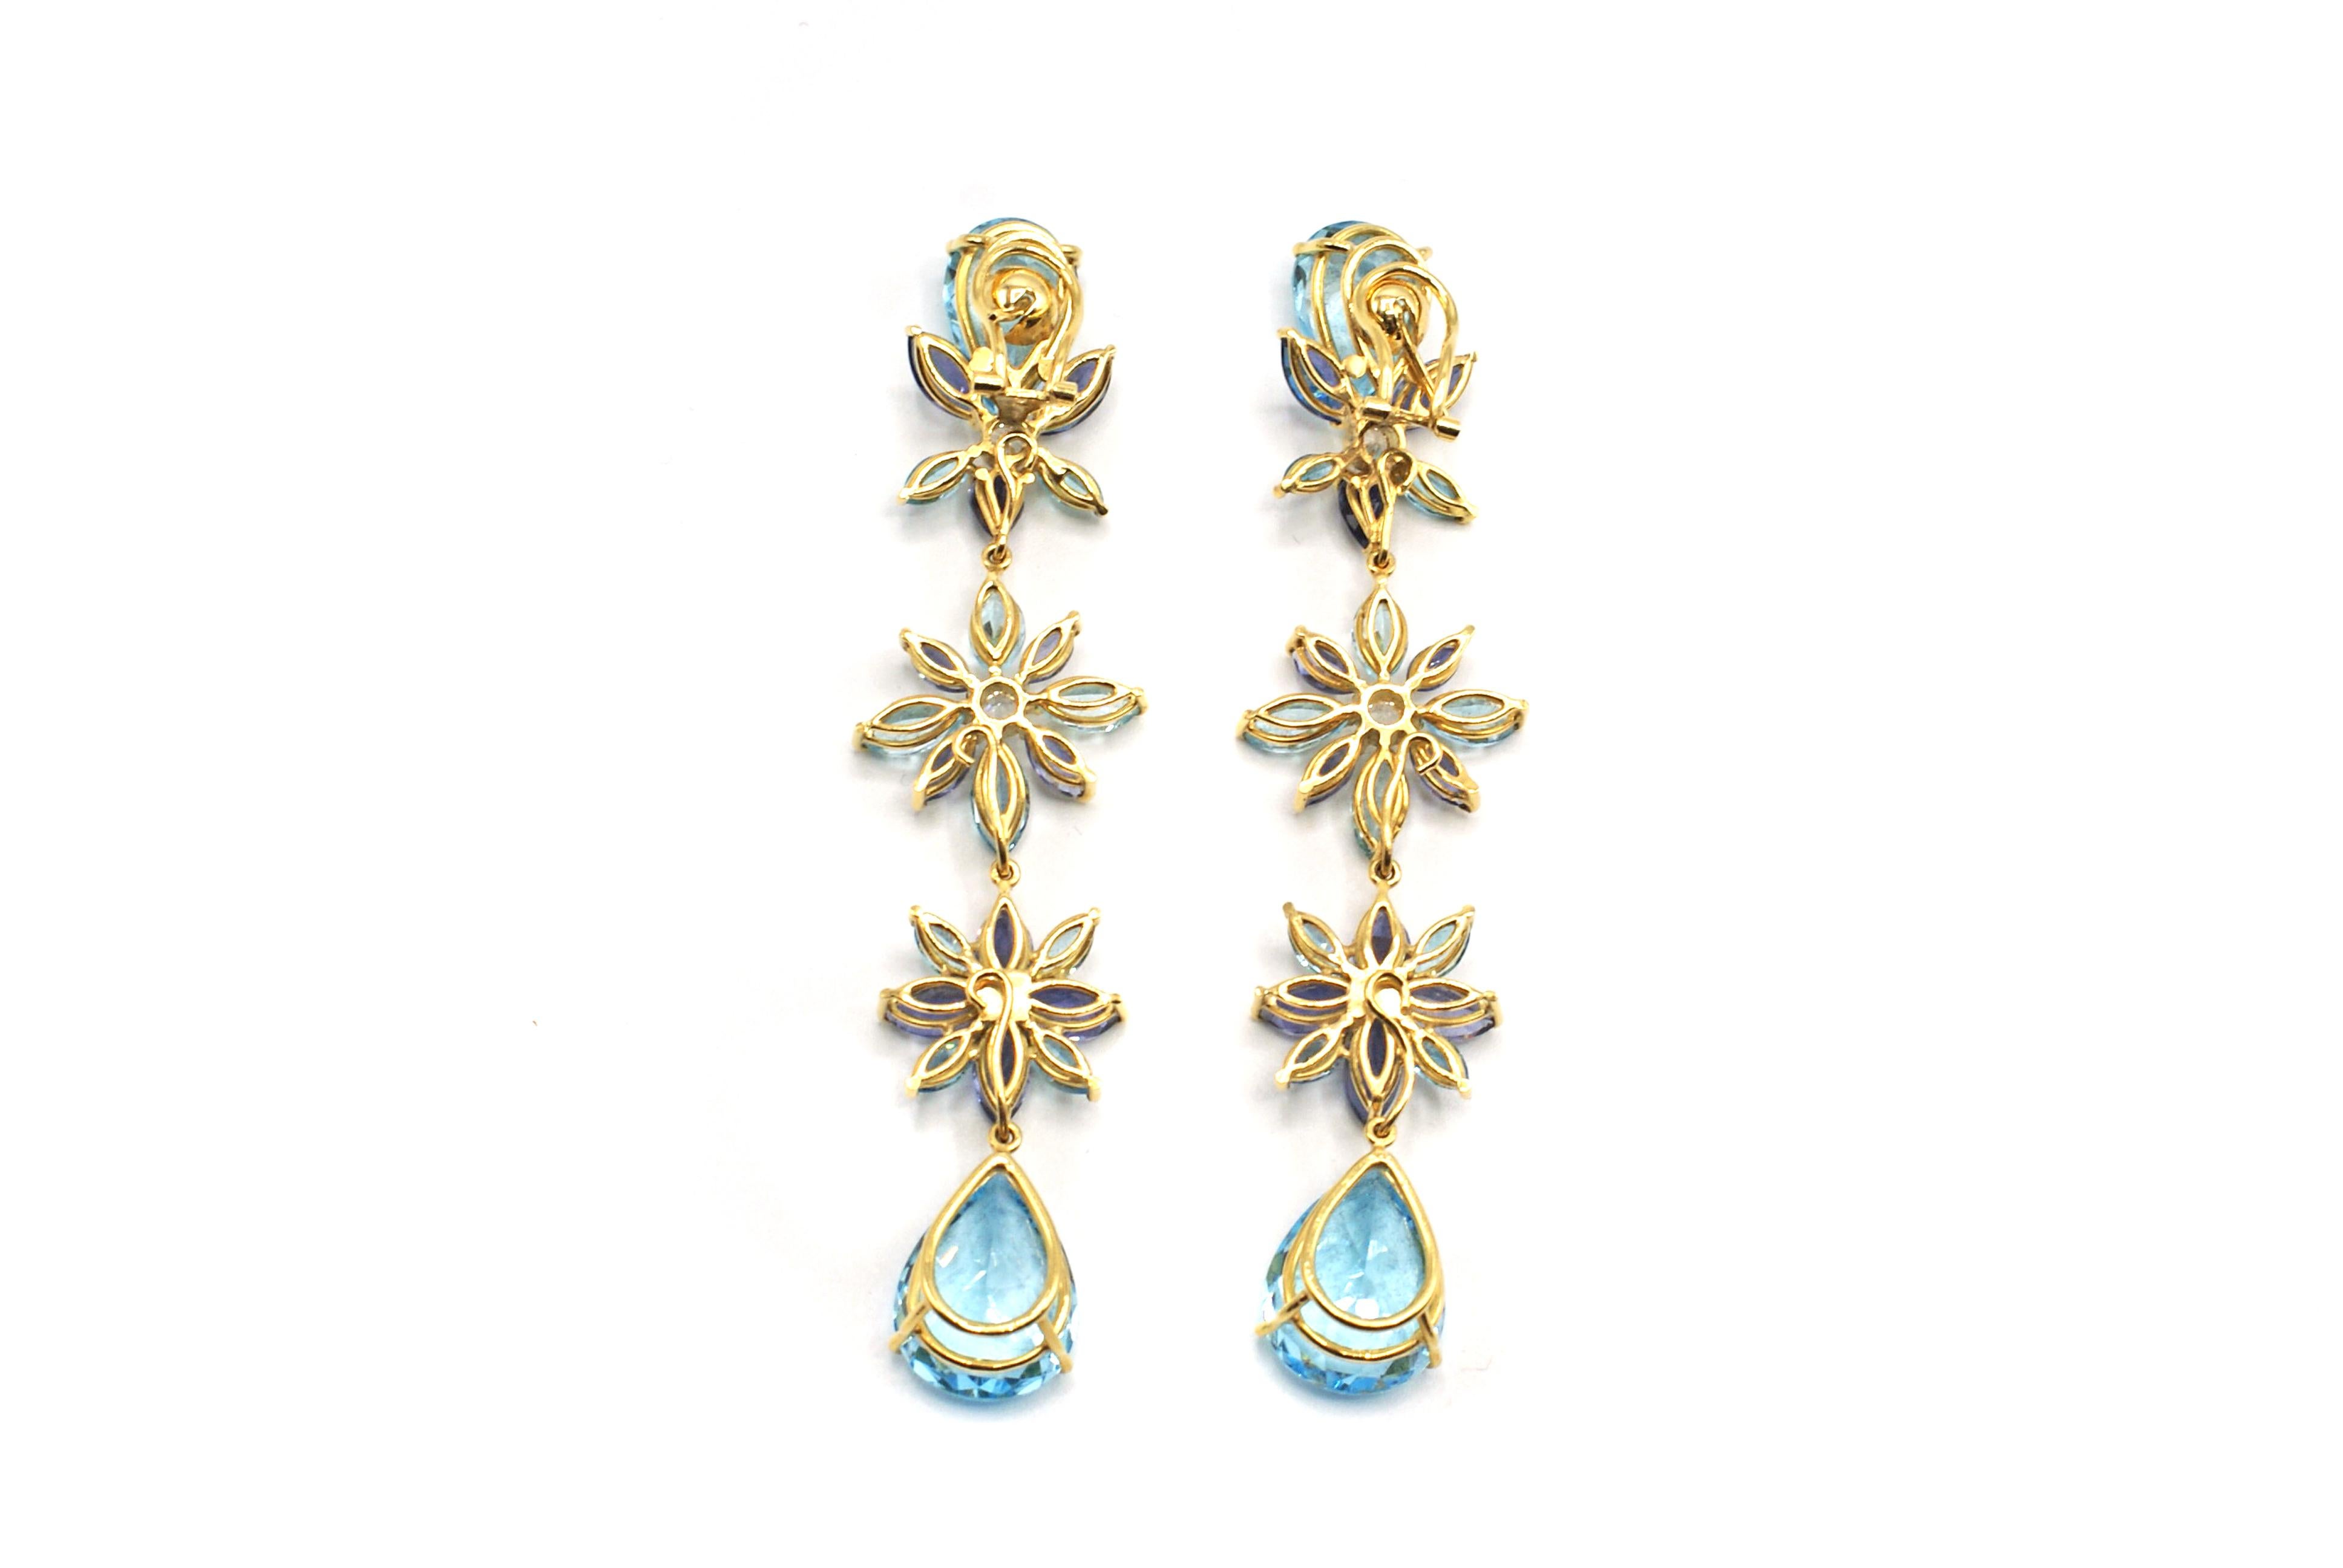 These stunning and bold 18 karat yellow gold earrings extend 3.5 inches from the earlobe down the neck, insuring to catch the eye of everyone in the room. Finely hand-crafted each earring is set with 2 pear shape vibrant blue Topazes on the top and